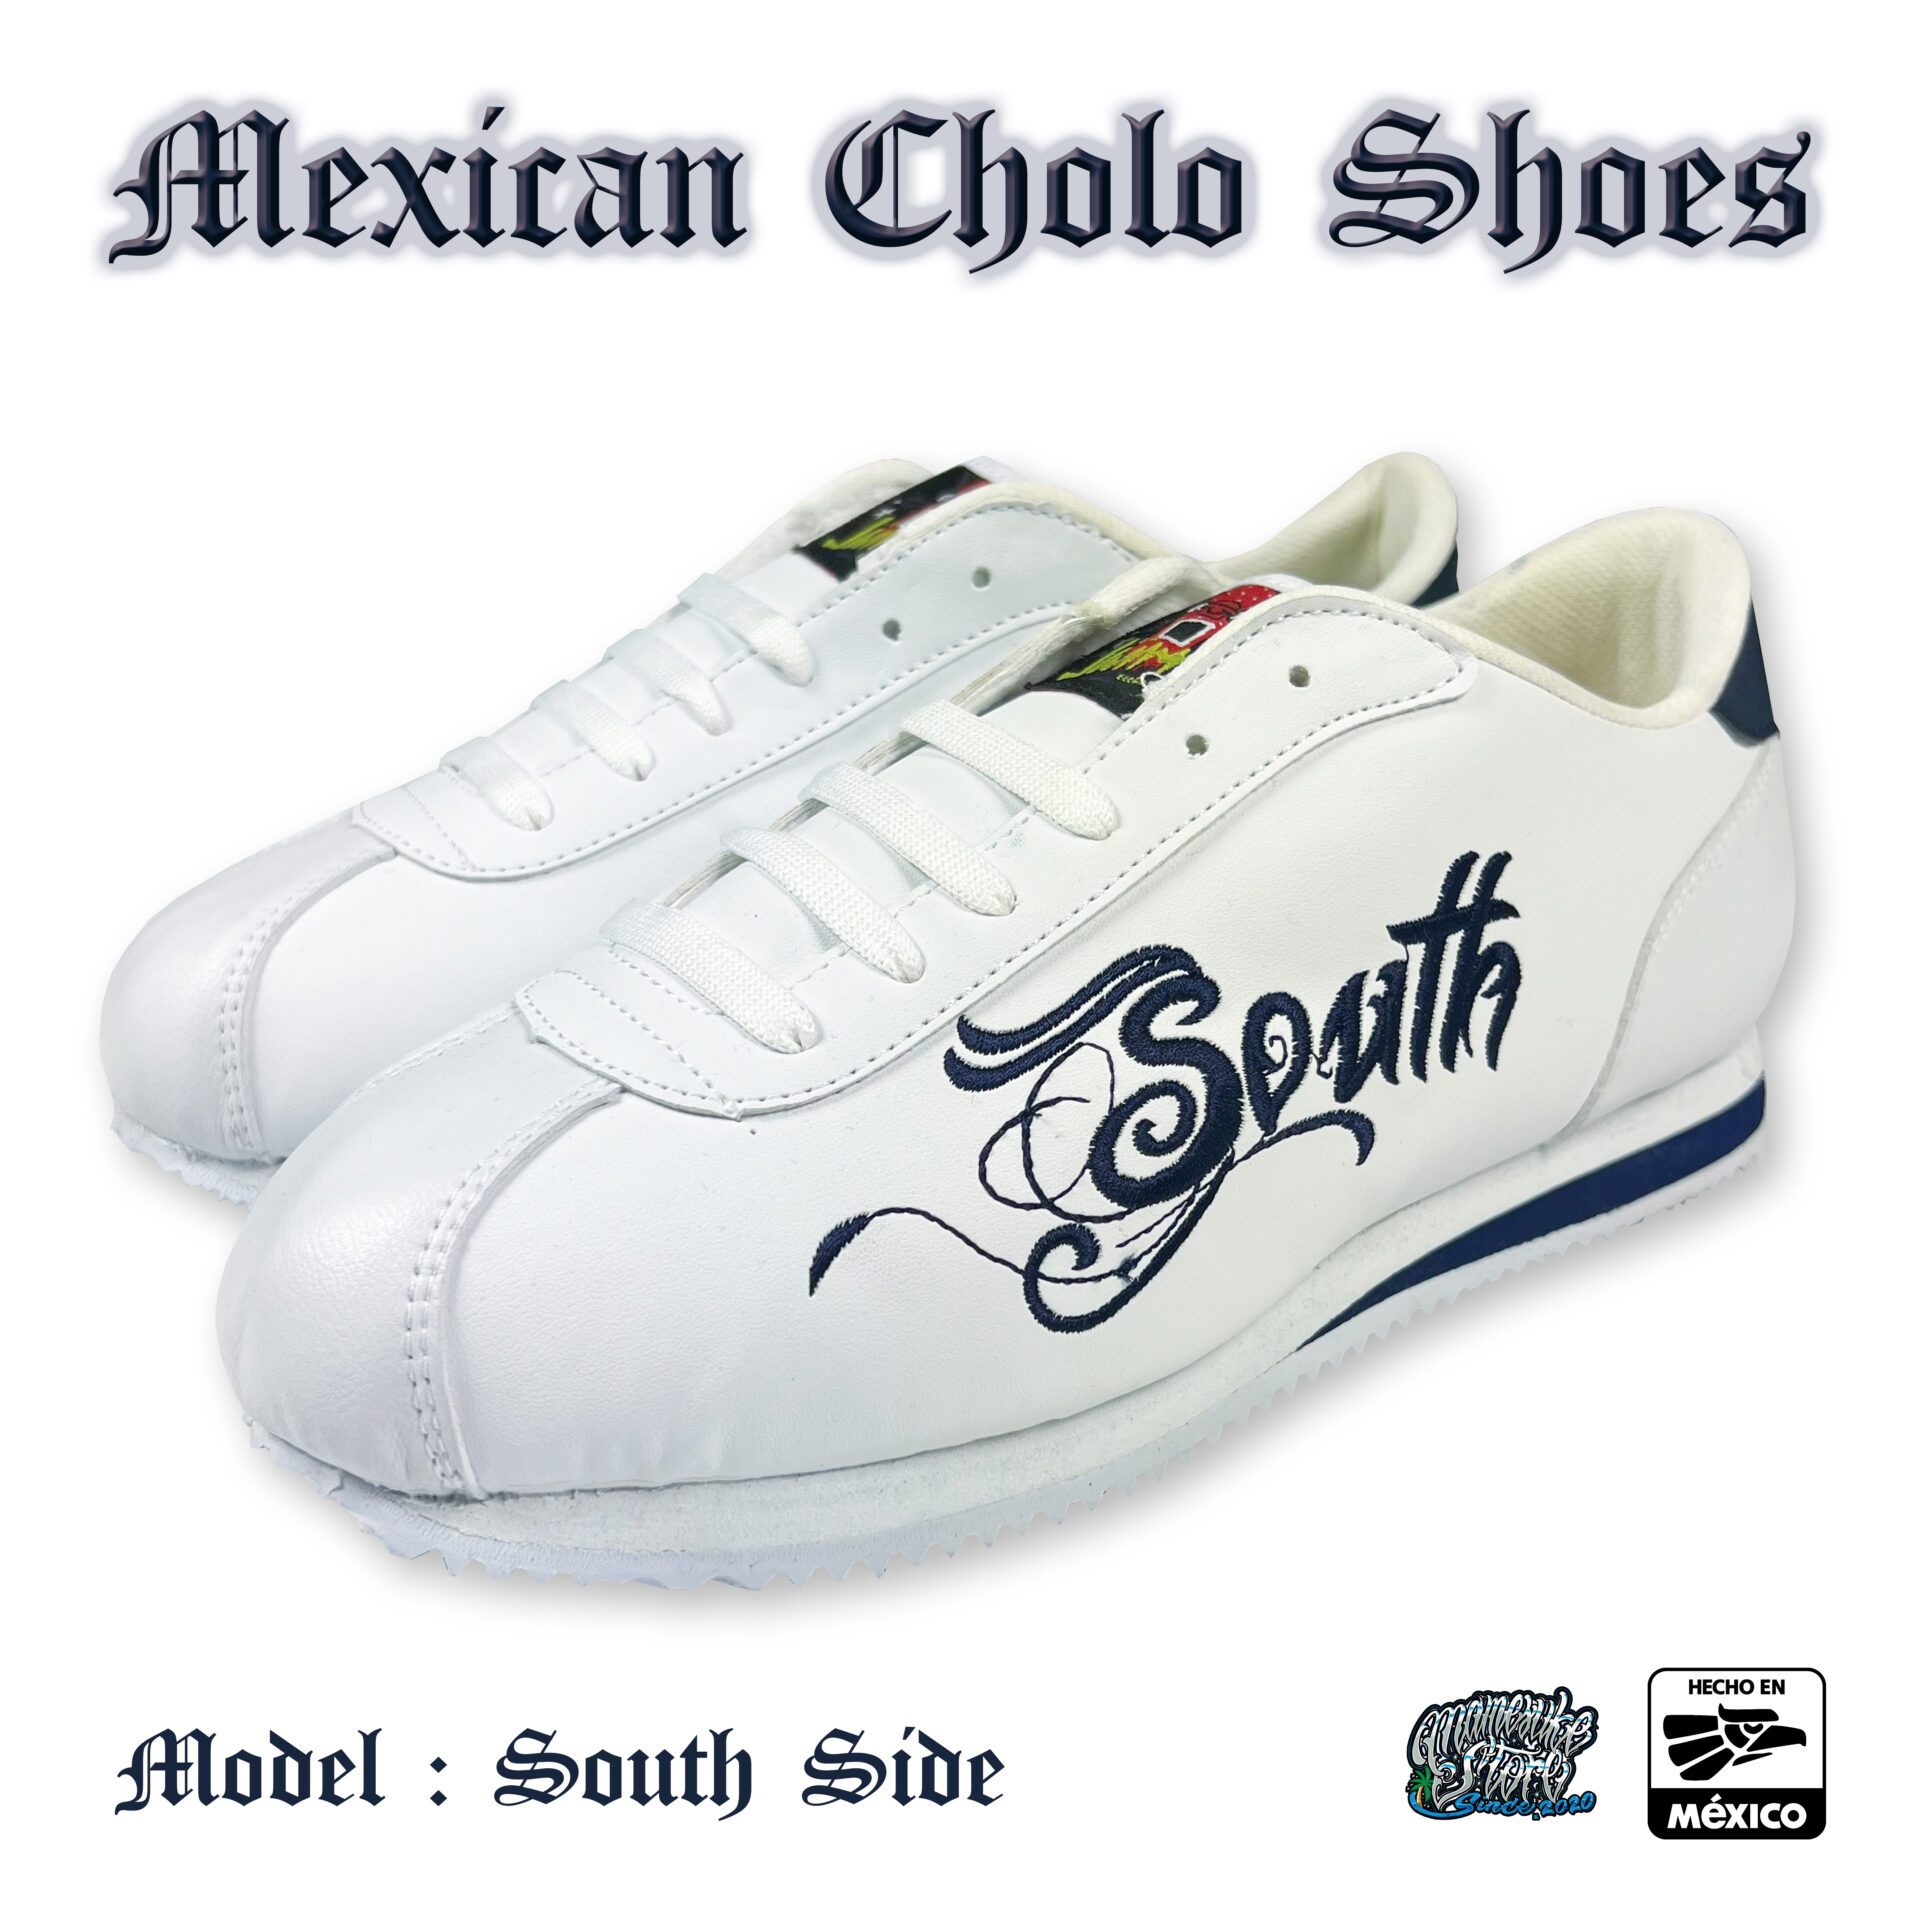 Mexican Cholo Shoes】South Side スニーカー メキシコ産 Cortez コルテッツ Chicano チカーノ Hecho  En Mexico メキシカン チョロシューズ | MAMESUKE STORE